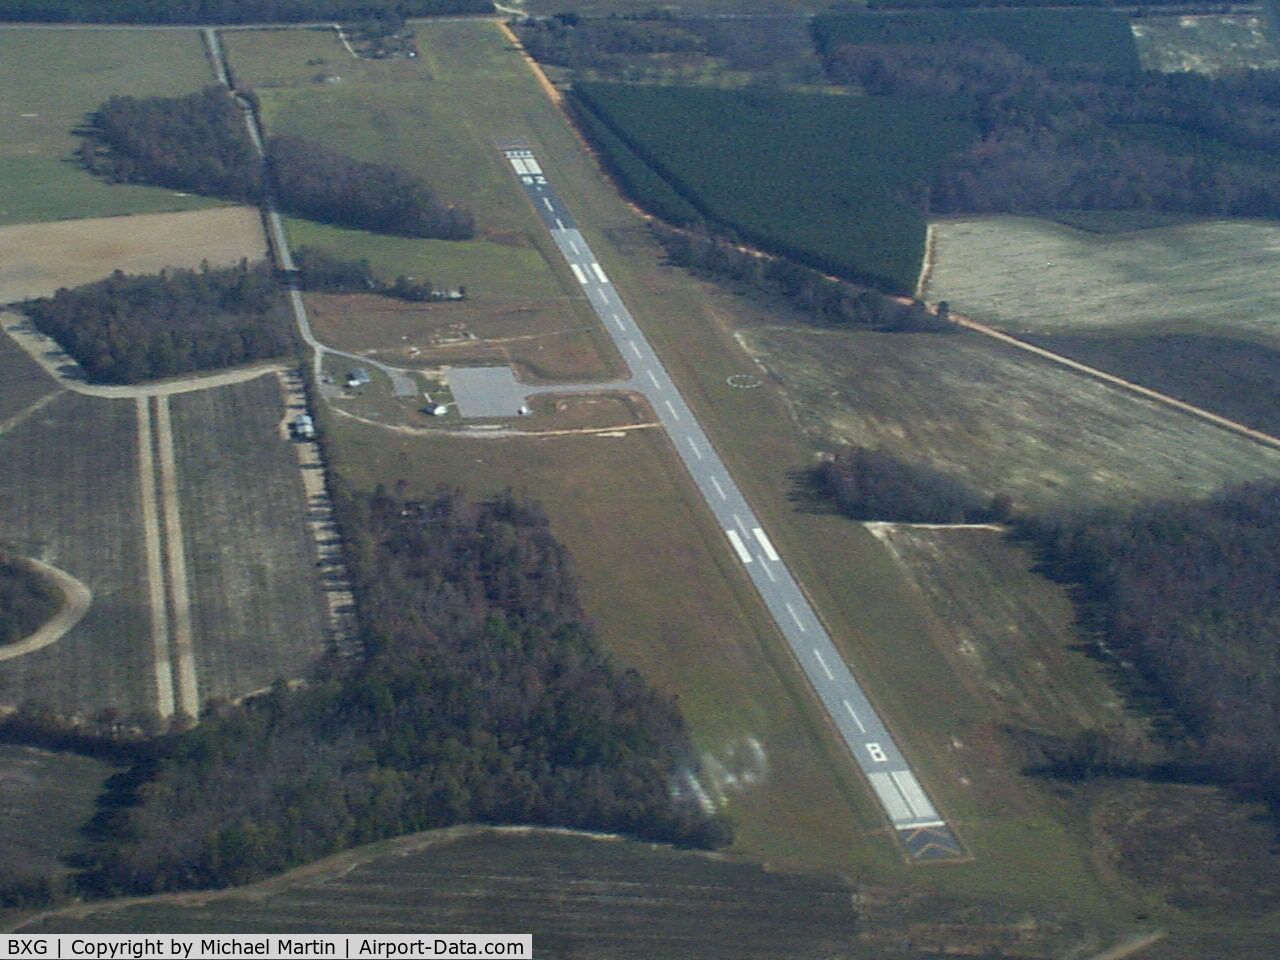 Burke County Airport (BXG) - Burke County Airport - See added runway extension